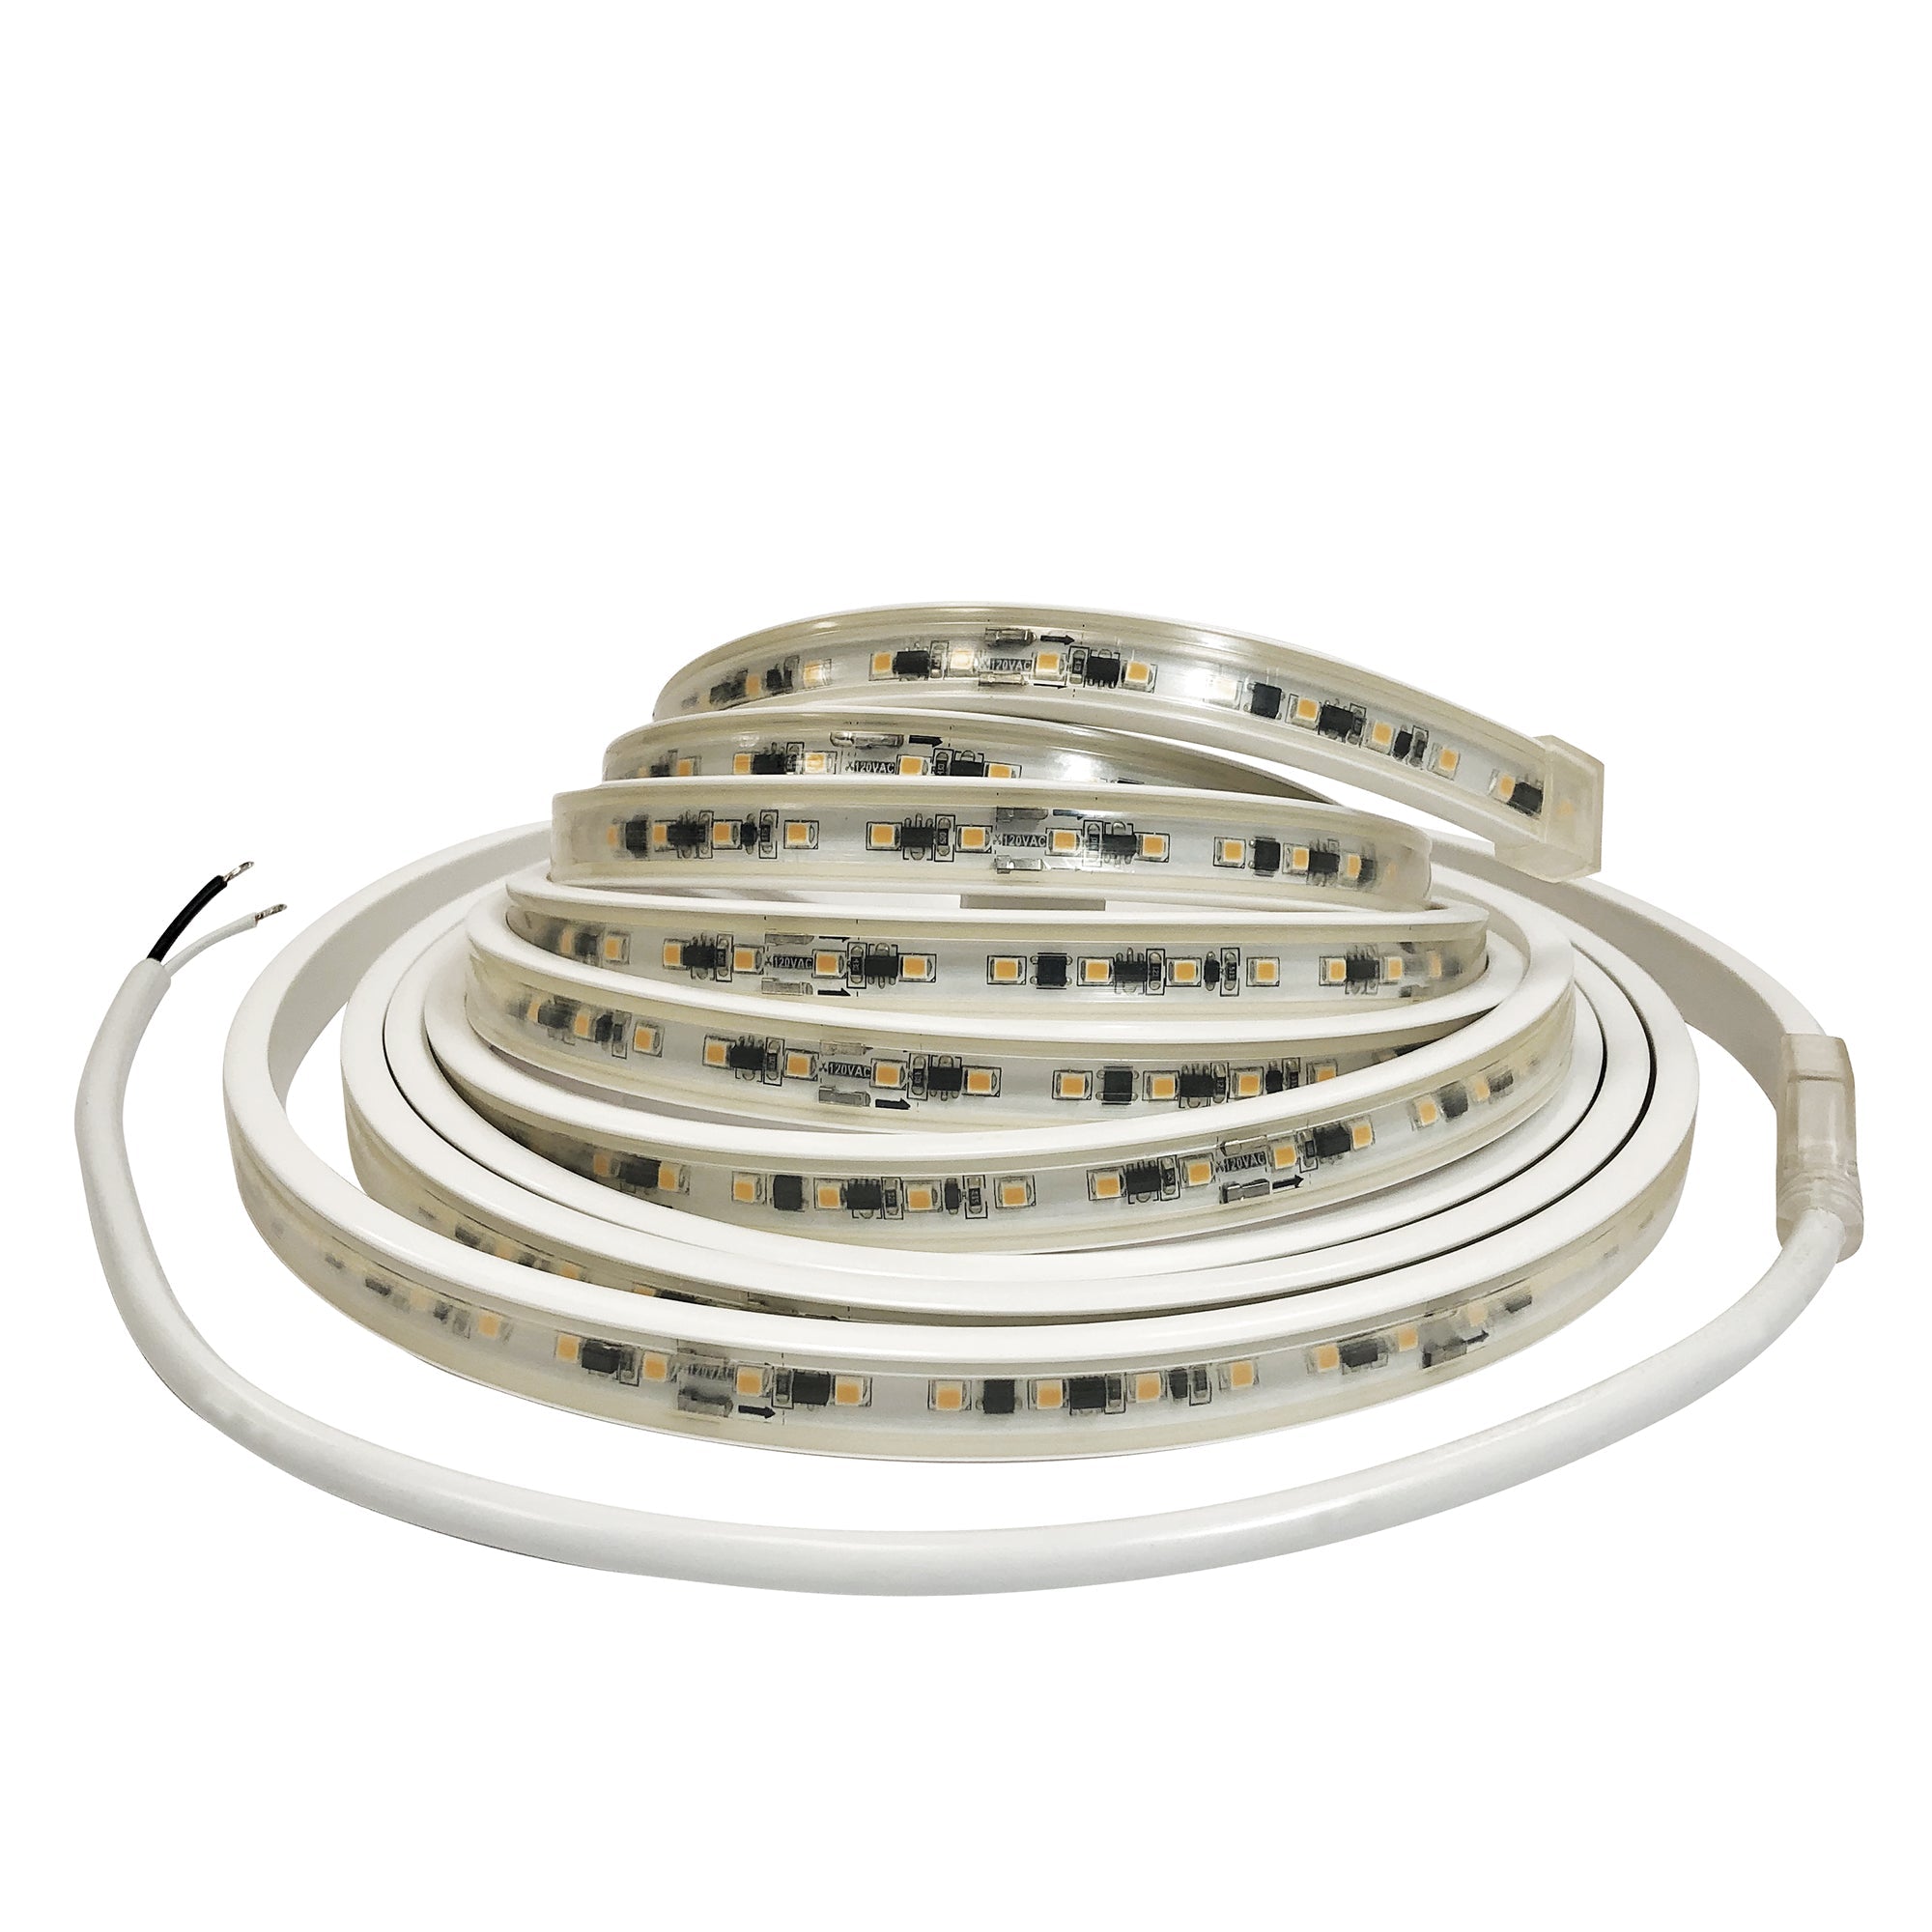 Nora Lighting NUTP13-W42-12-930/HW - Accent / Undercabinet - Custom Cut 42-ft 120V Continuous LED Tape Light, 330lm / 3.6W per foot, 3000K, w/ Mounting Clips and 8' Hardwired Power Cord